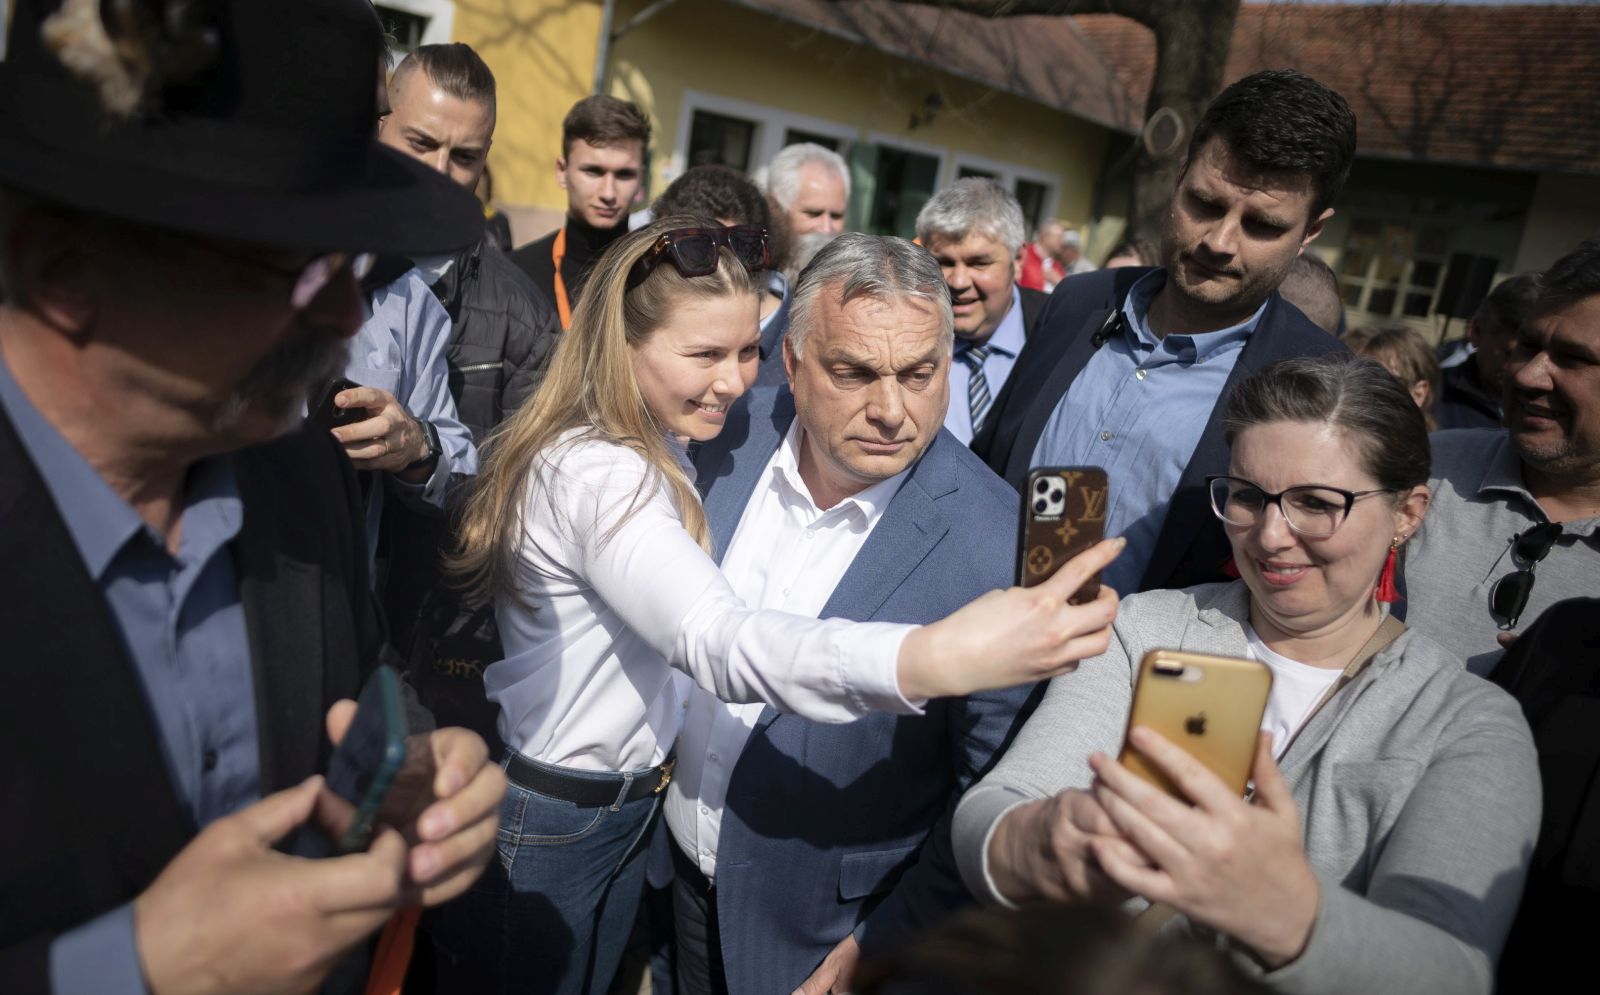 epa09858042 A handout photo made available by the Hungarian PM's Press Office shows Hungarian Prime Minister Viktor Orban, Chairman of the ruling Fidesz party (C) taking a selfie with one of his supporters during a campaign rally in Bekescsaba, Hungary, 29 March 2022. The general elections will take place on 03 April 2022.  EPA/BENKO VIVIEN CHER / HUNGARIAN PRIME MINISTER OFFICE / HANDOUT HUNGARY OUT HANDOUT EDITORIAL USE ONLY/NO SALES